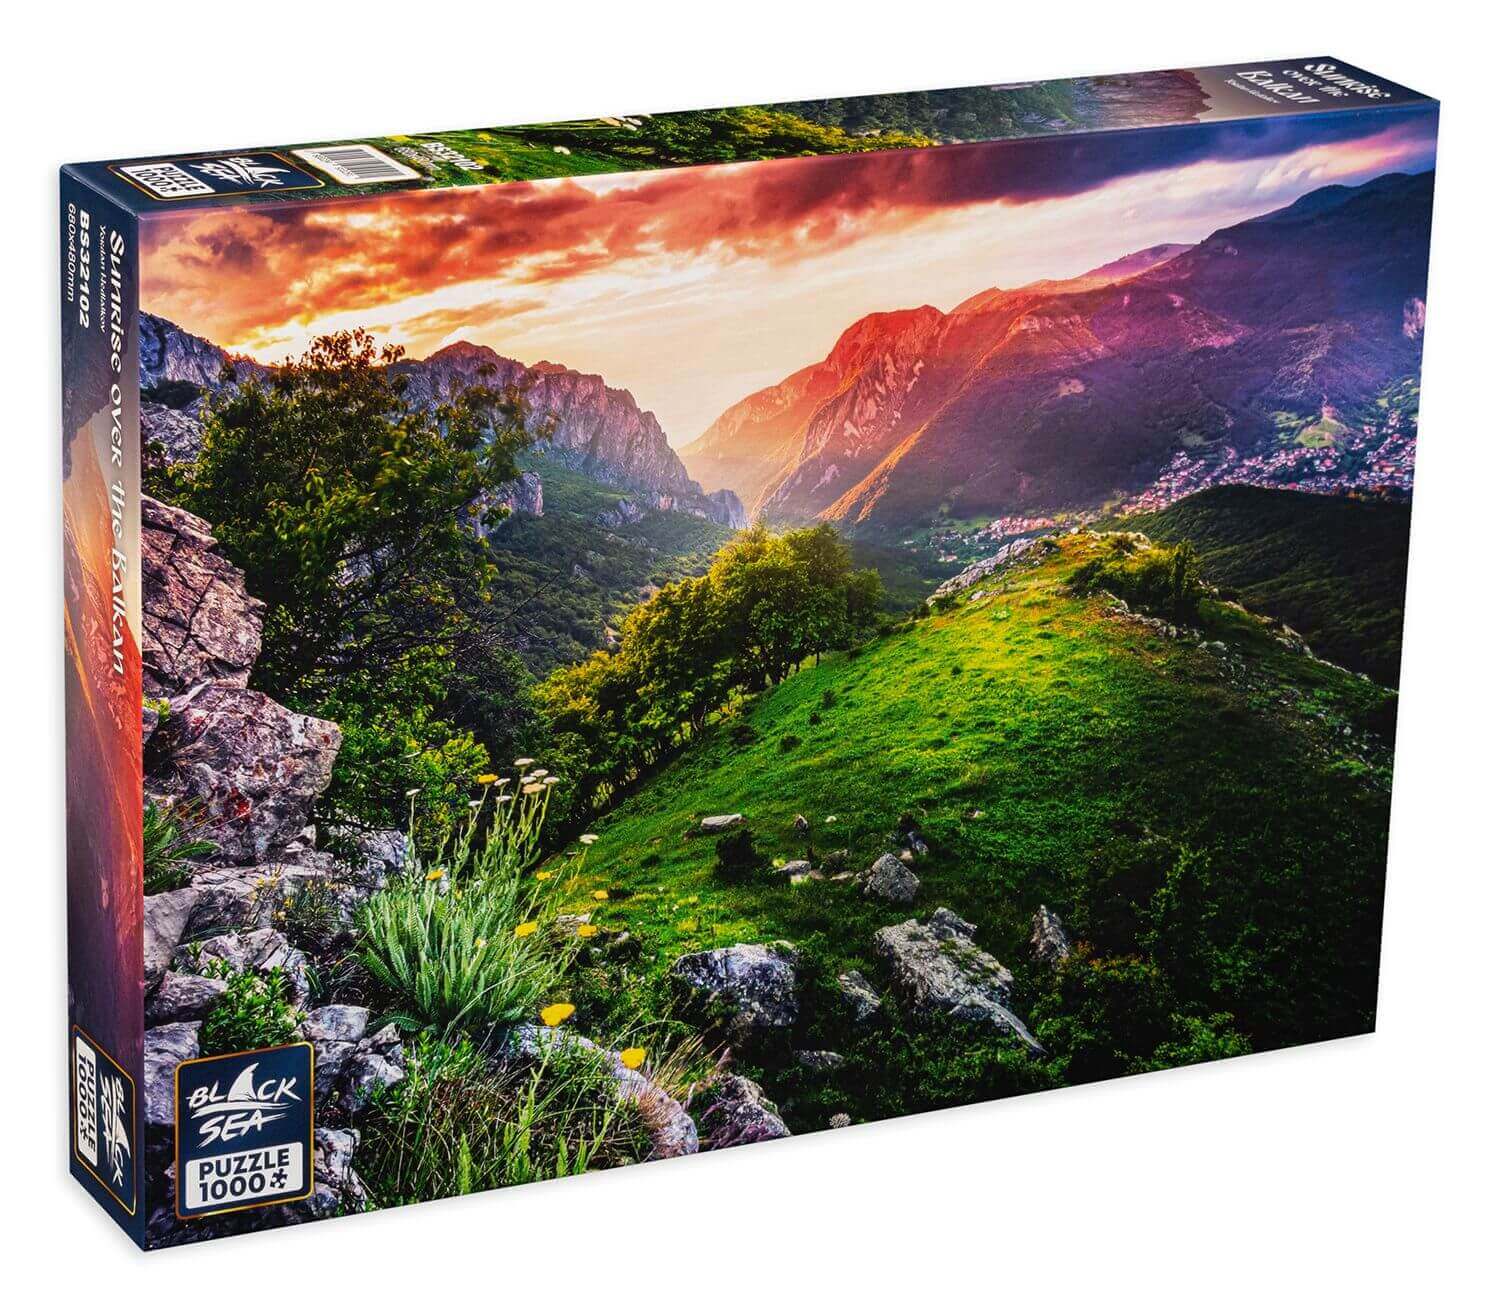 Puzzle Black Sea 1000 pieces - Sunrise over the mountain, The Vrachanski Balkan range impresses with the austerity of its beautiful nature; the sharp, jagged outline of its vertical cliffs rises to more than 400 metres, and among the cliffs more than 500